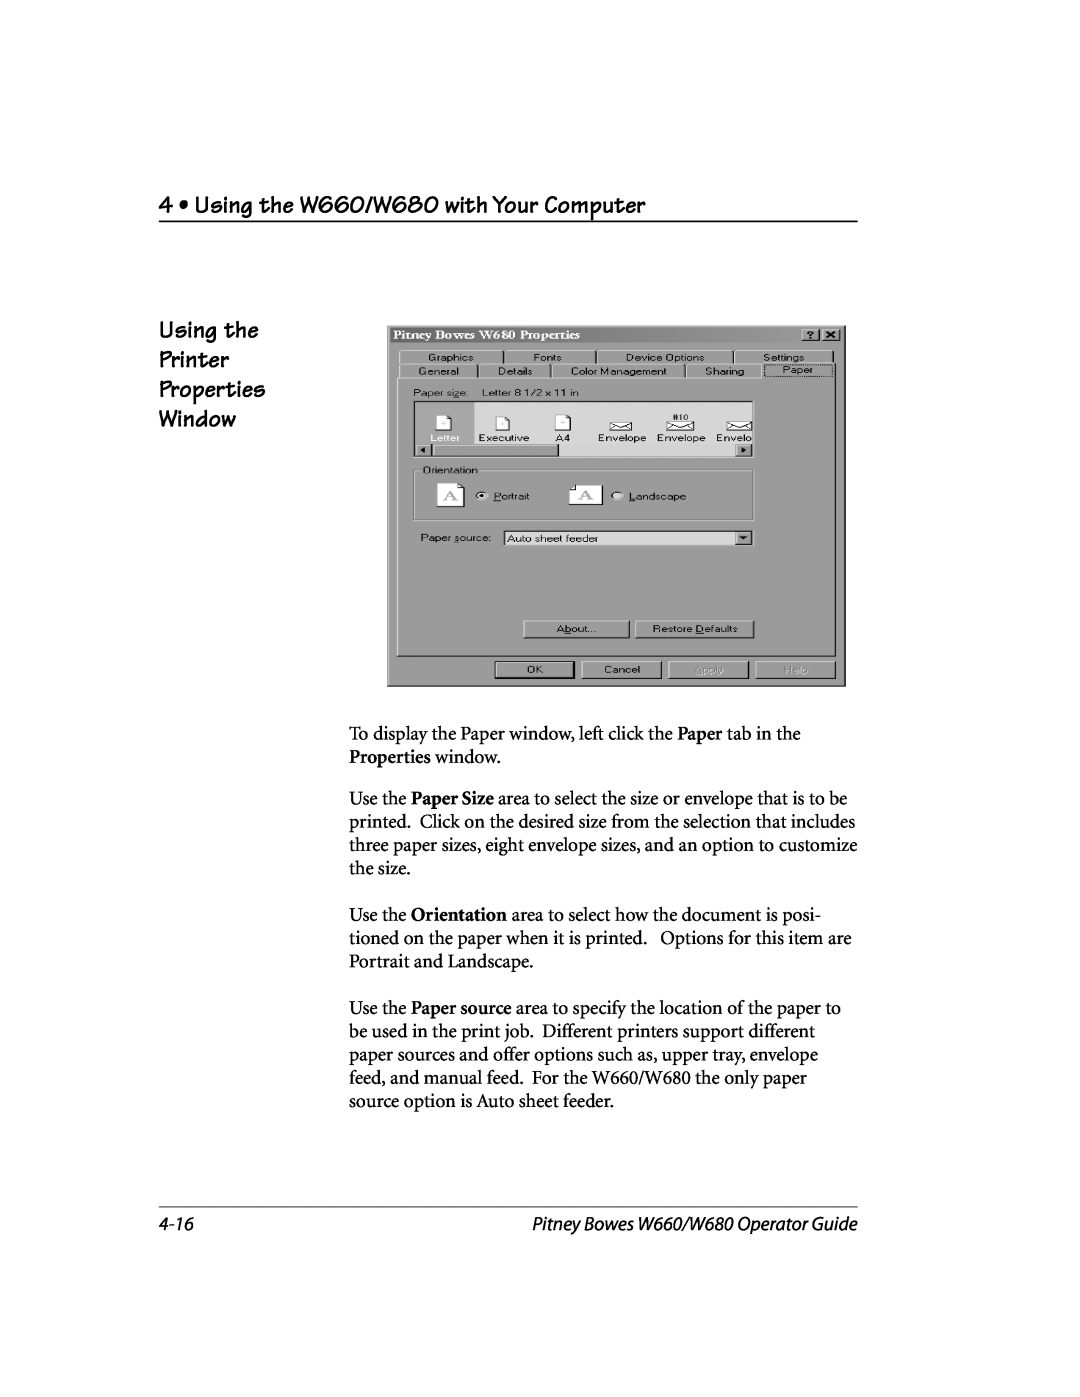 Pitney Bowes manual Using the W660/W680 with Your Computer Using the Printer, Properties Window, Properties window 